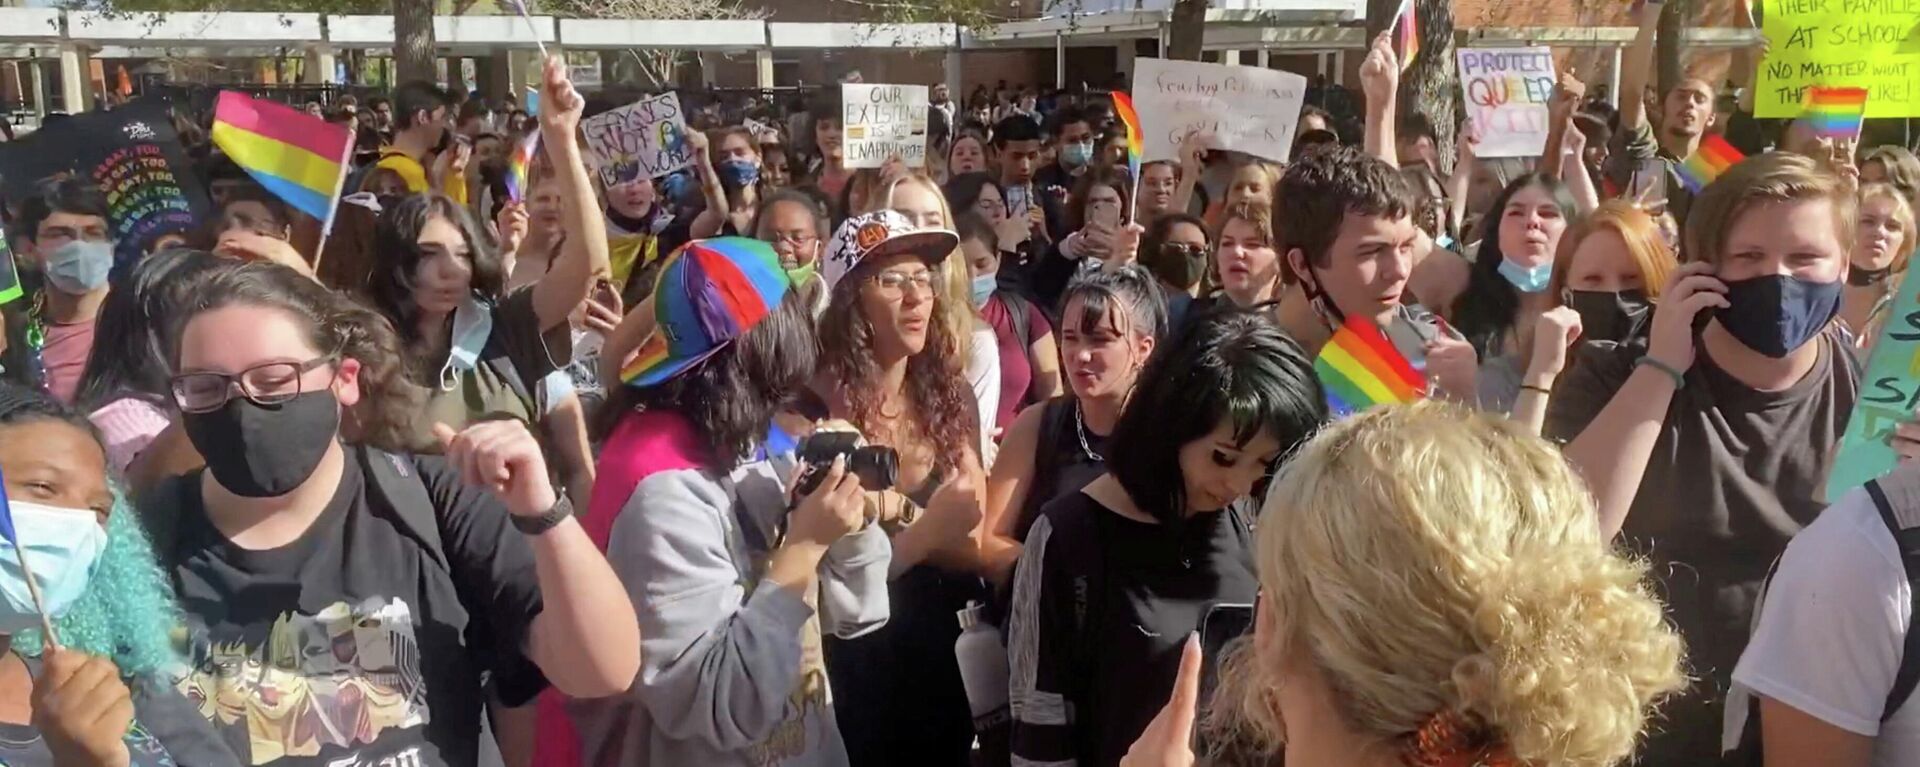 Students gather to protest after Florida's House of Representatives approved a Republican-backed bill that would prohibit classroom discussion of sexual orientation and gender identity, in Winter Park, Florida, U.S., March 7, 2022 in this still image obtained from a video posted on social media. - Sputnik International, 1920, 08.03.2022